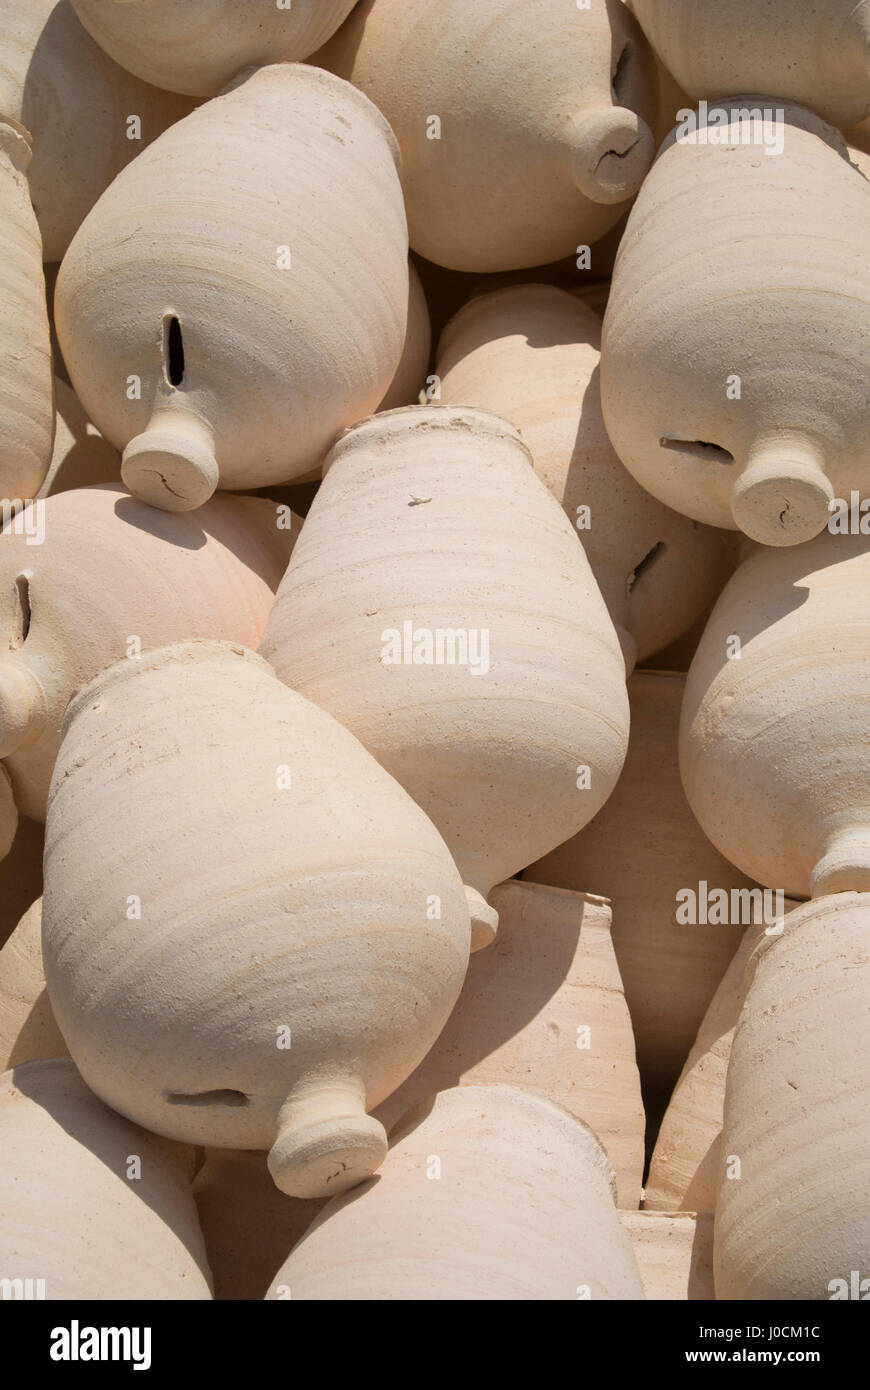 Clay water pots in a pile, A'ali, Bahrain Stock Photo